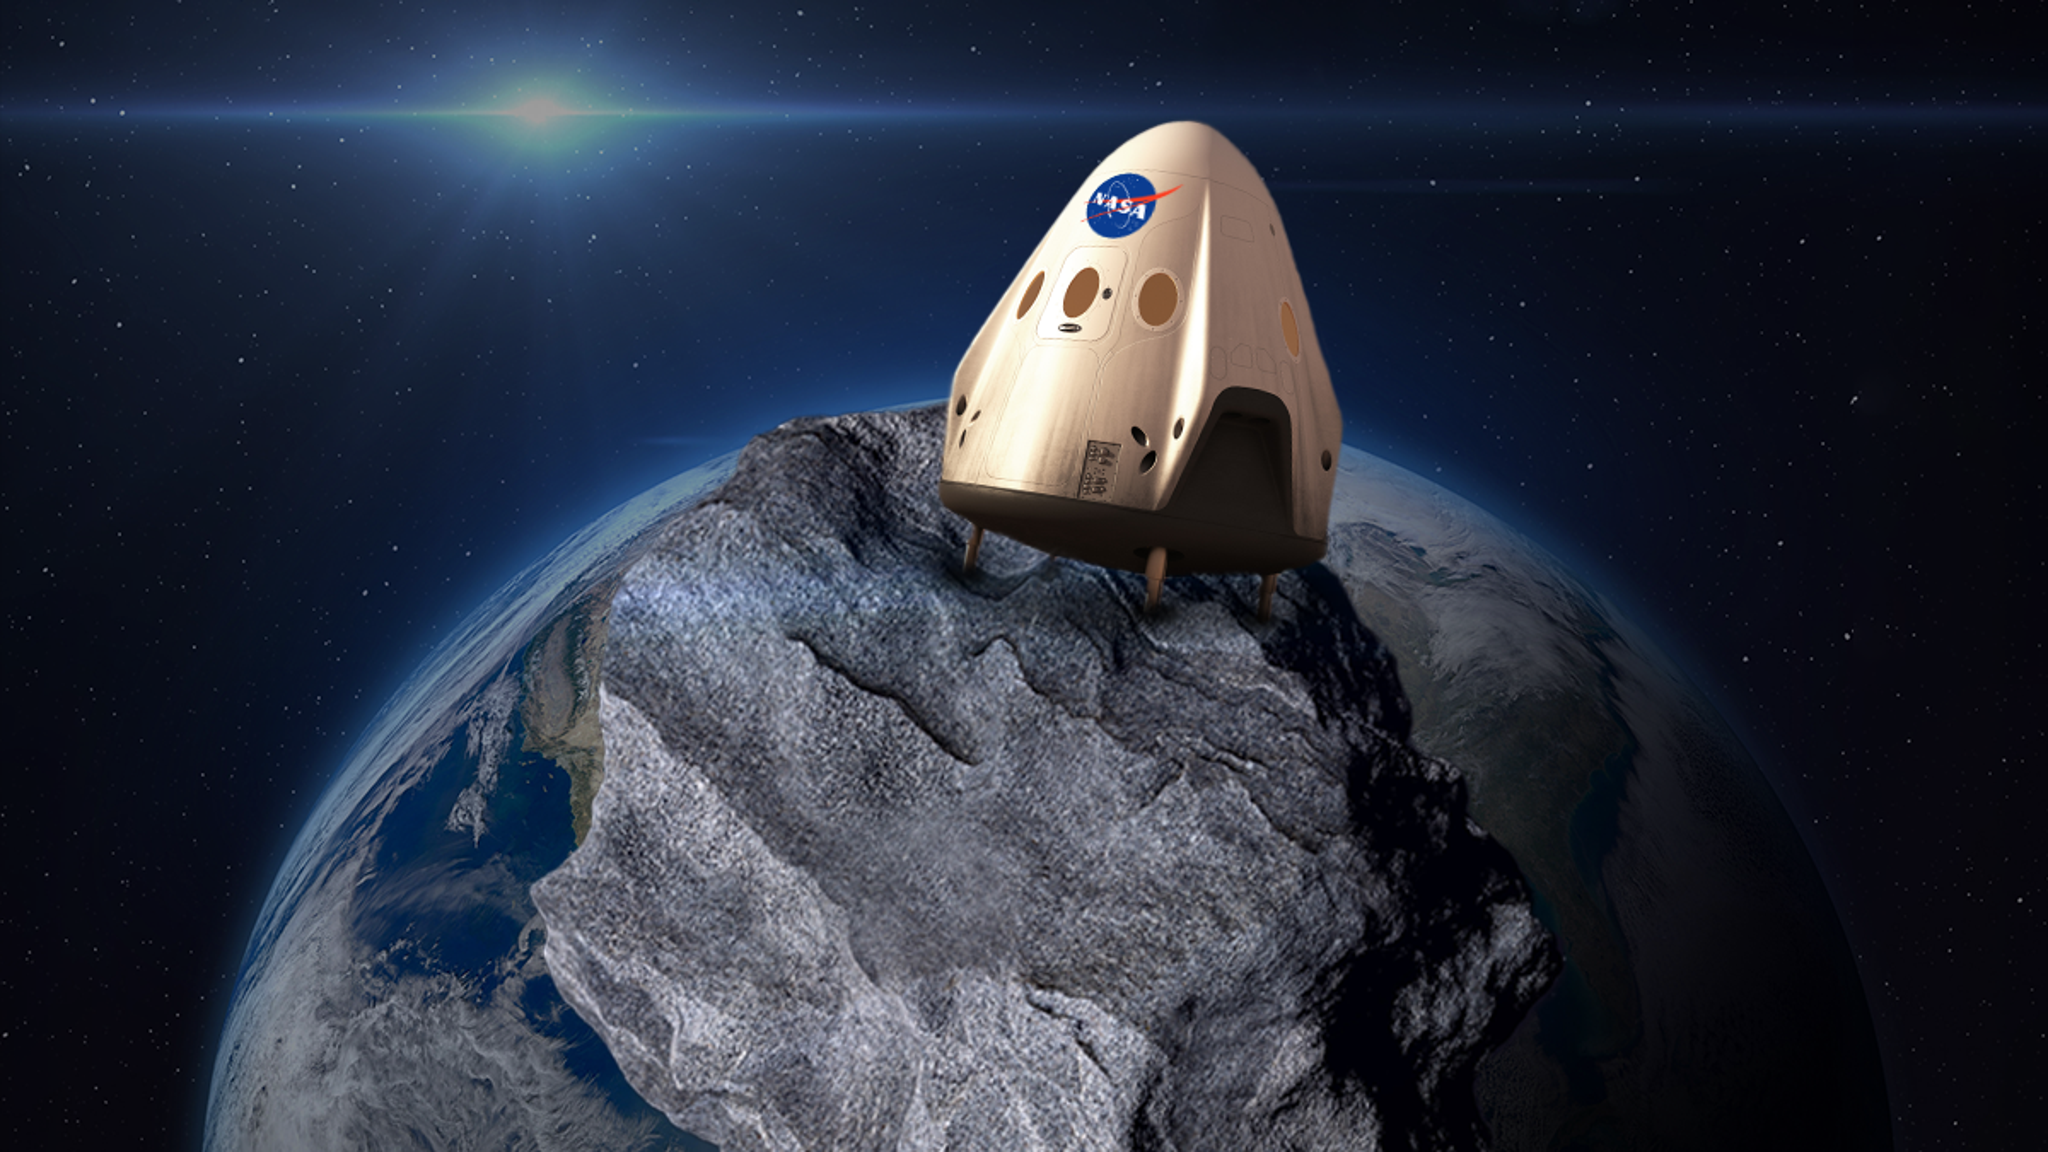 NASA Capsule Returns to Earth with Asteroid Sample Years After Launch